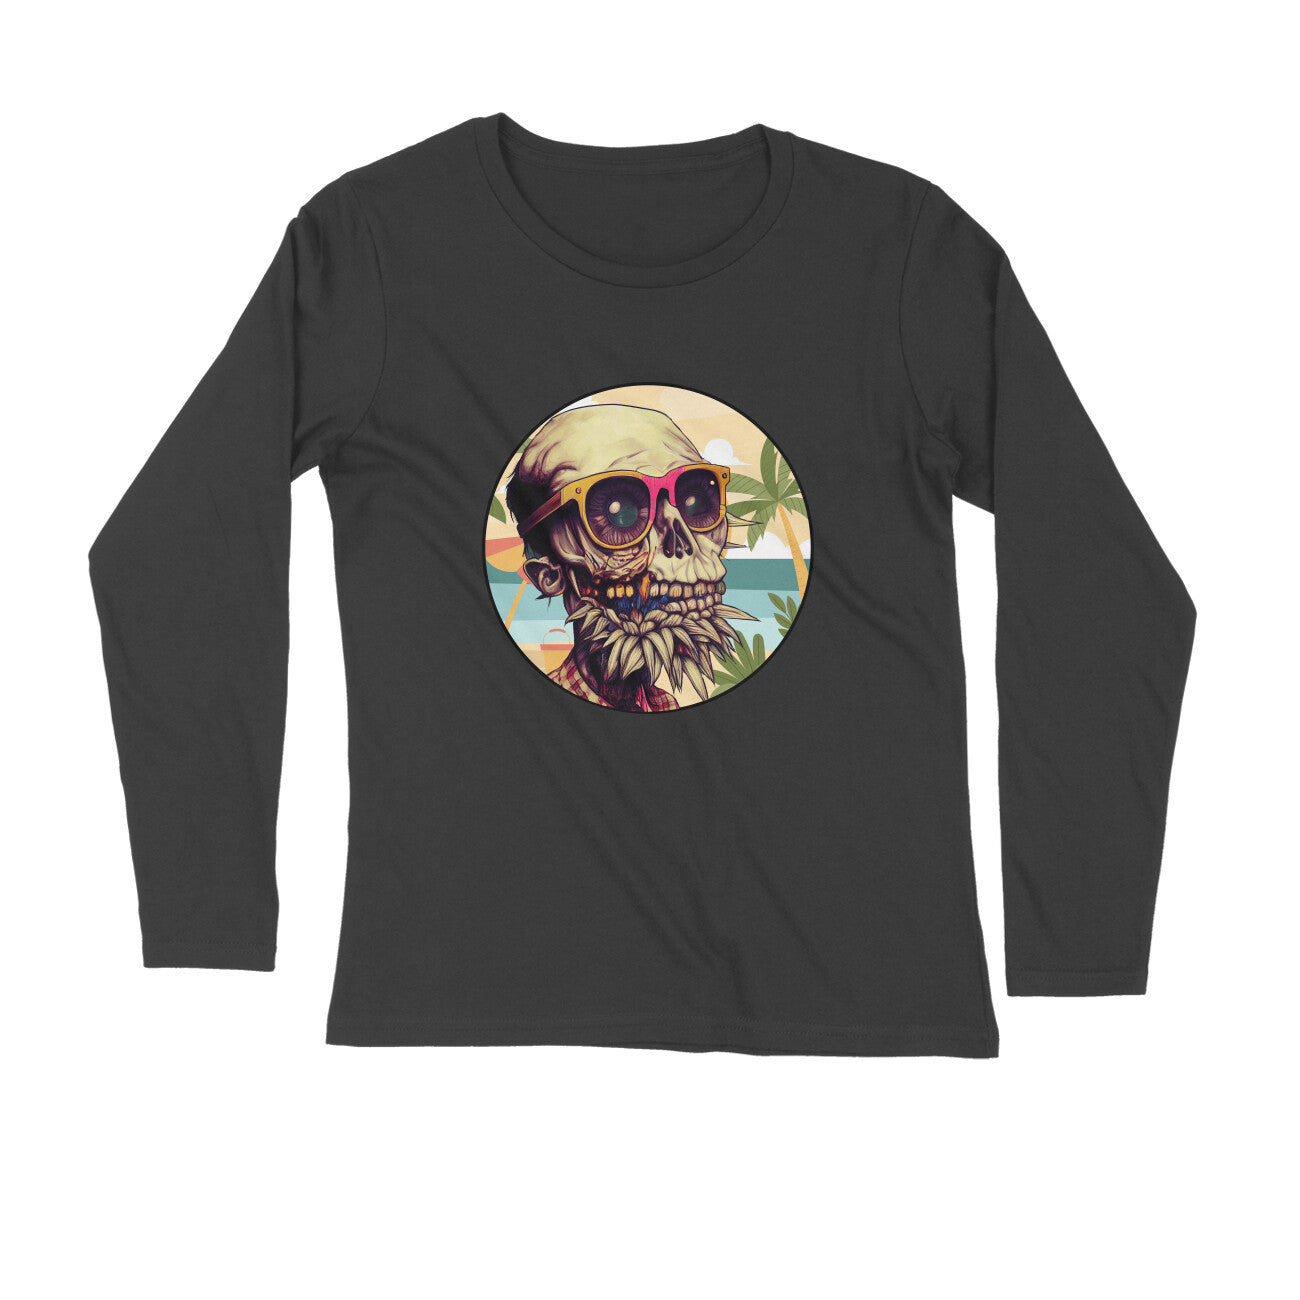 Zombies and monsters Printed Full Sleeves S-Shirt